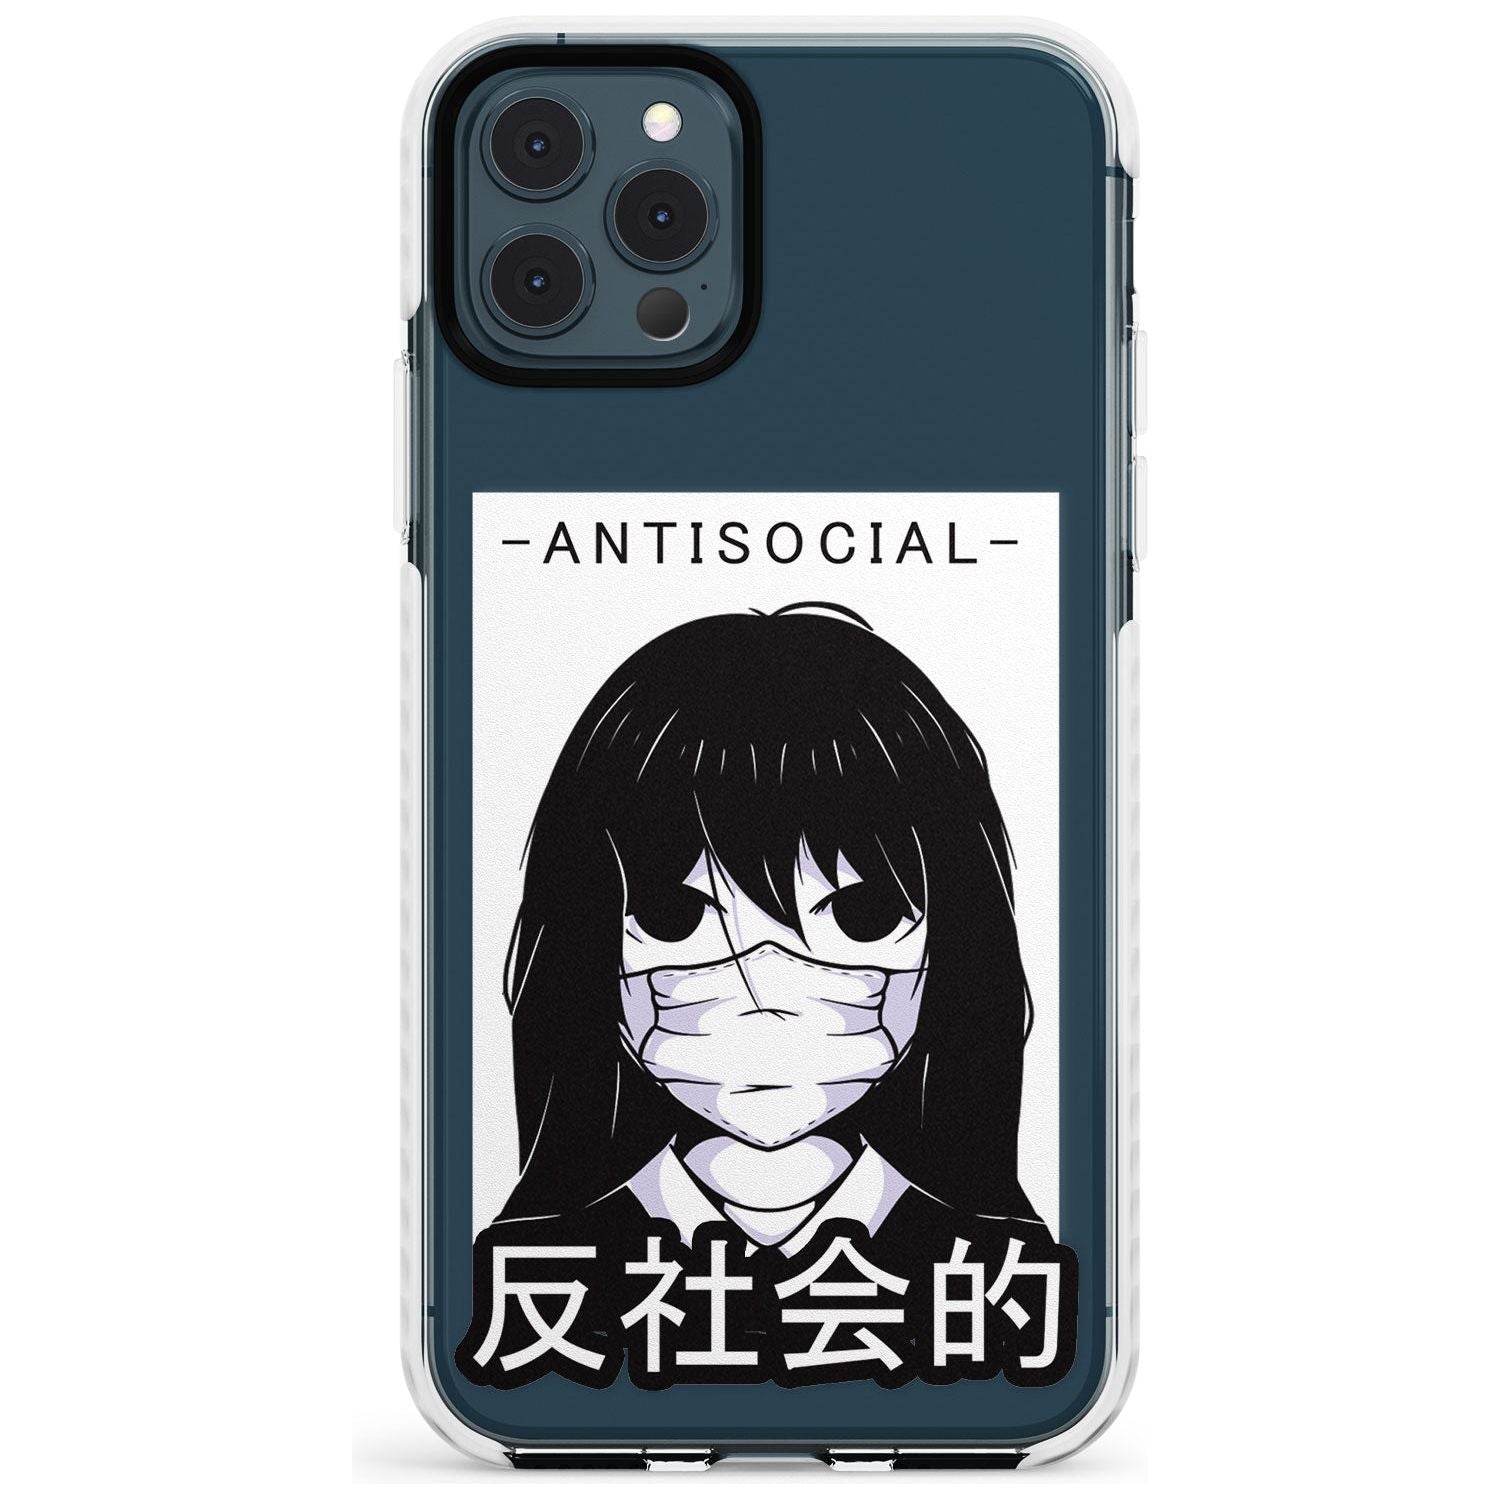 Anti-Social Impact Phone Case for iPhone 11 Pro Max